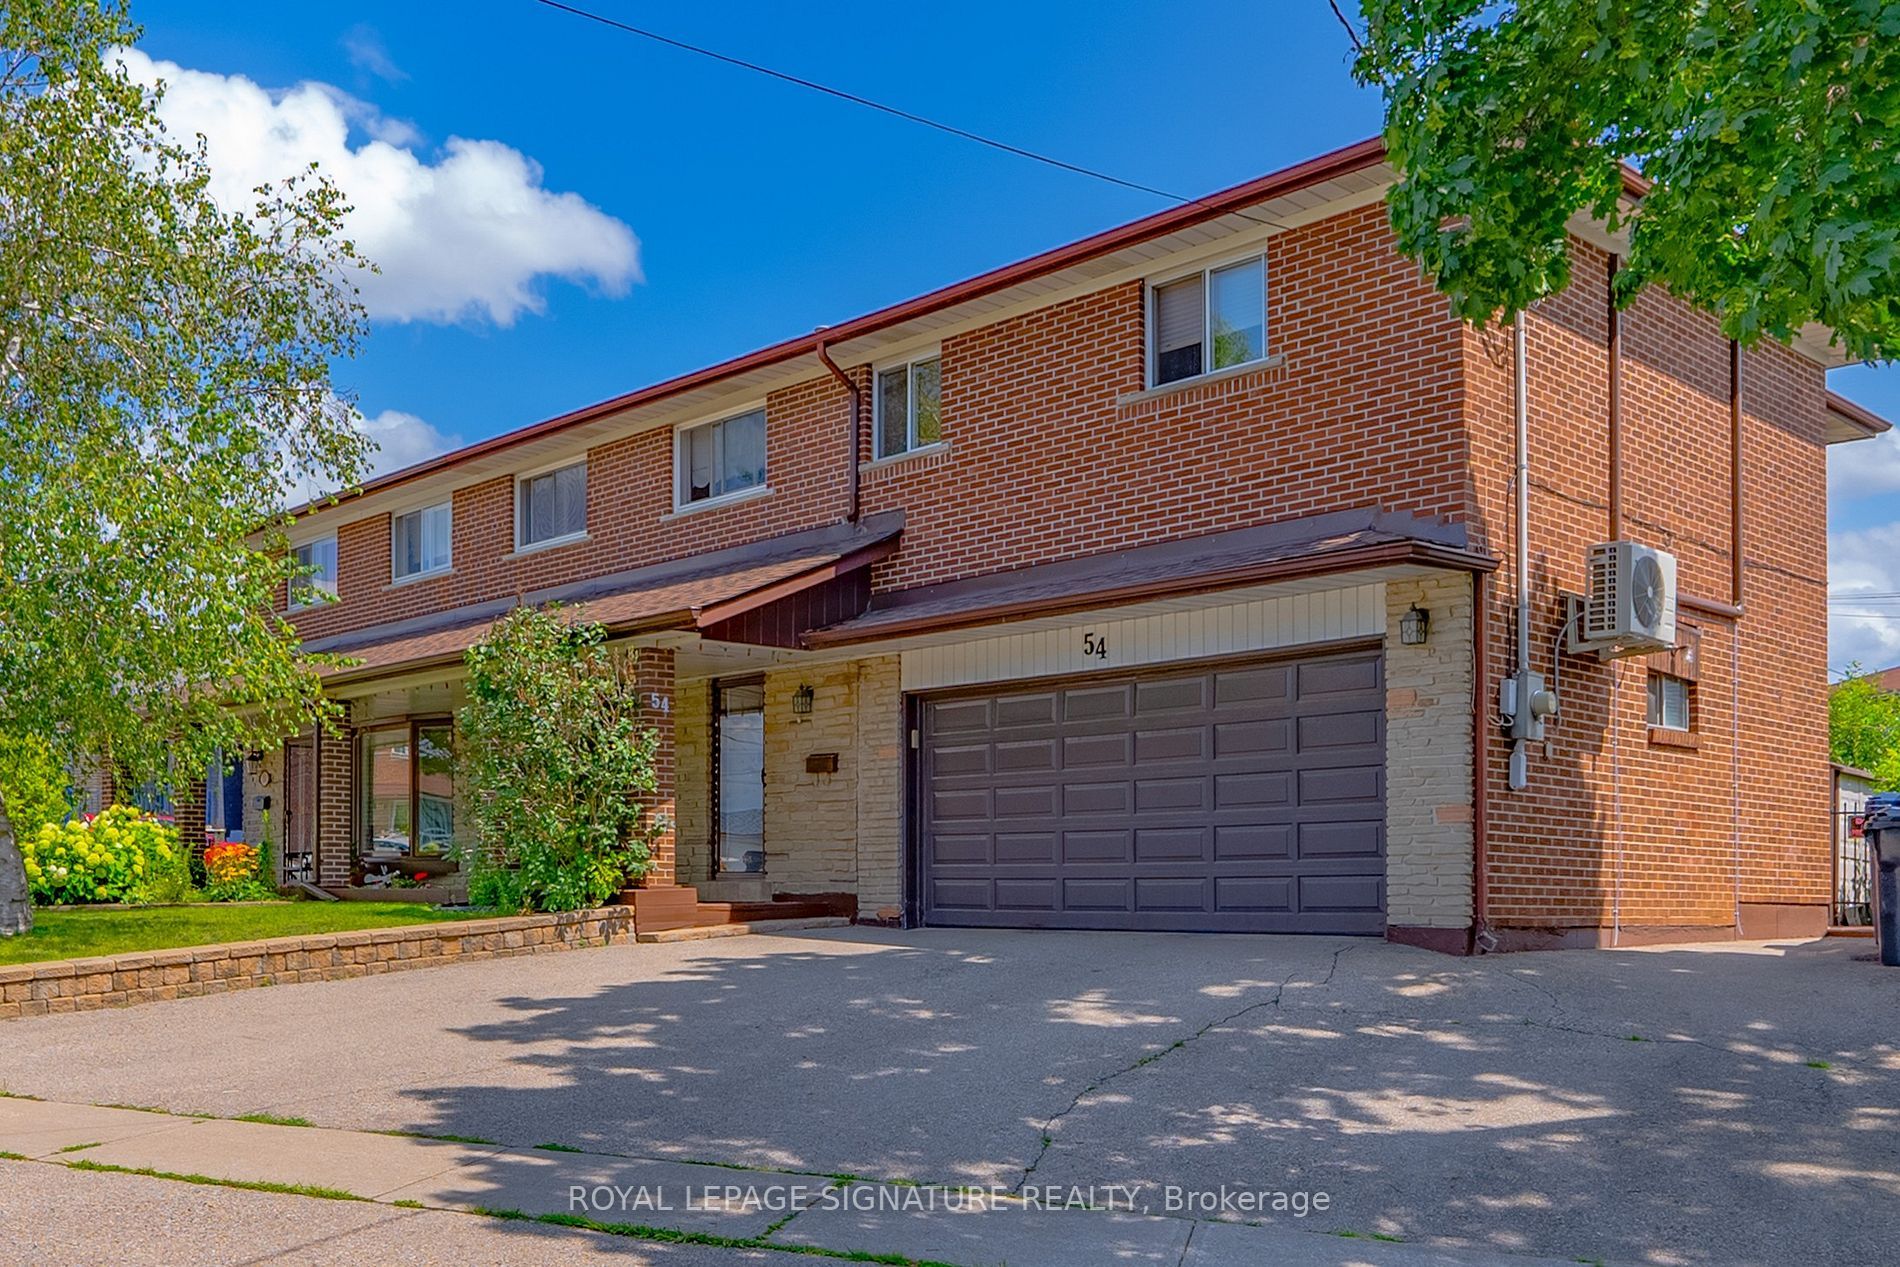 I have sold a property at 54 Faulkner CRES in Toronto
